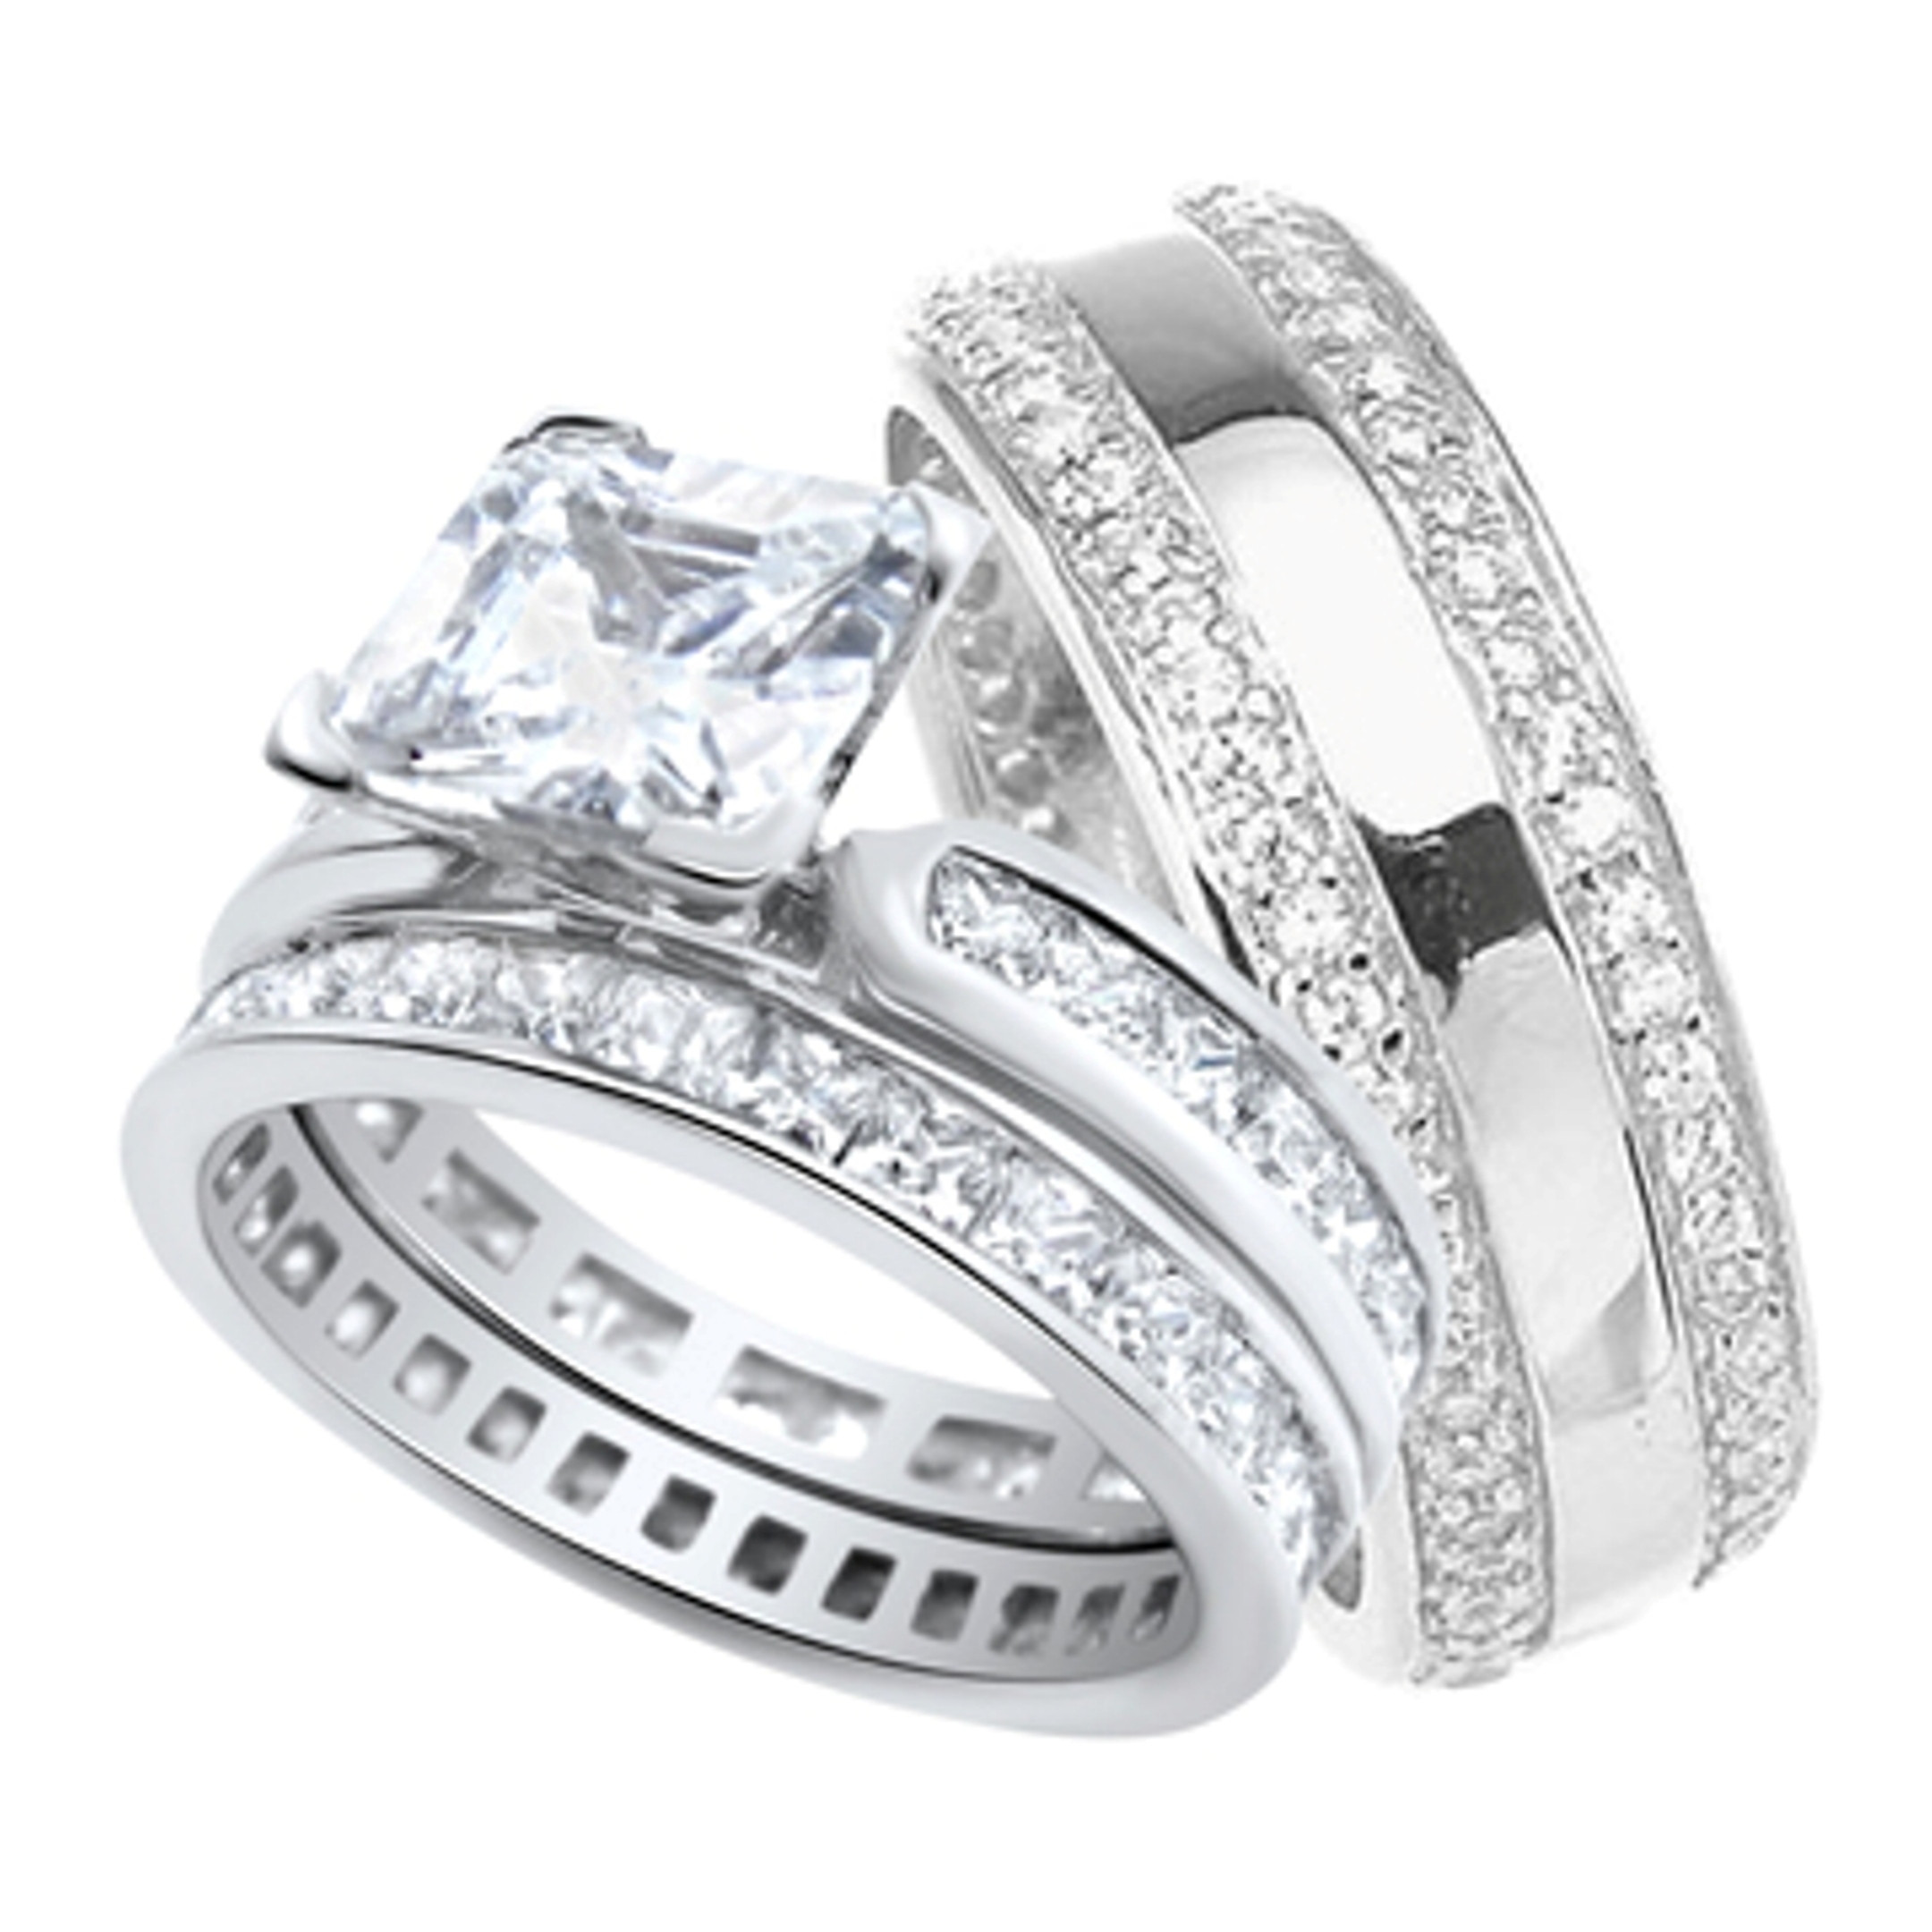 Walmart His And Hers Wedding Rings
 His and Hers Wedding Ring Set Matching Sterling Silver